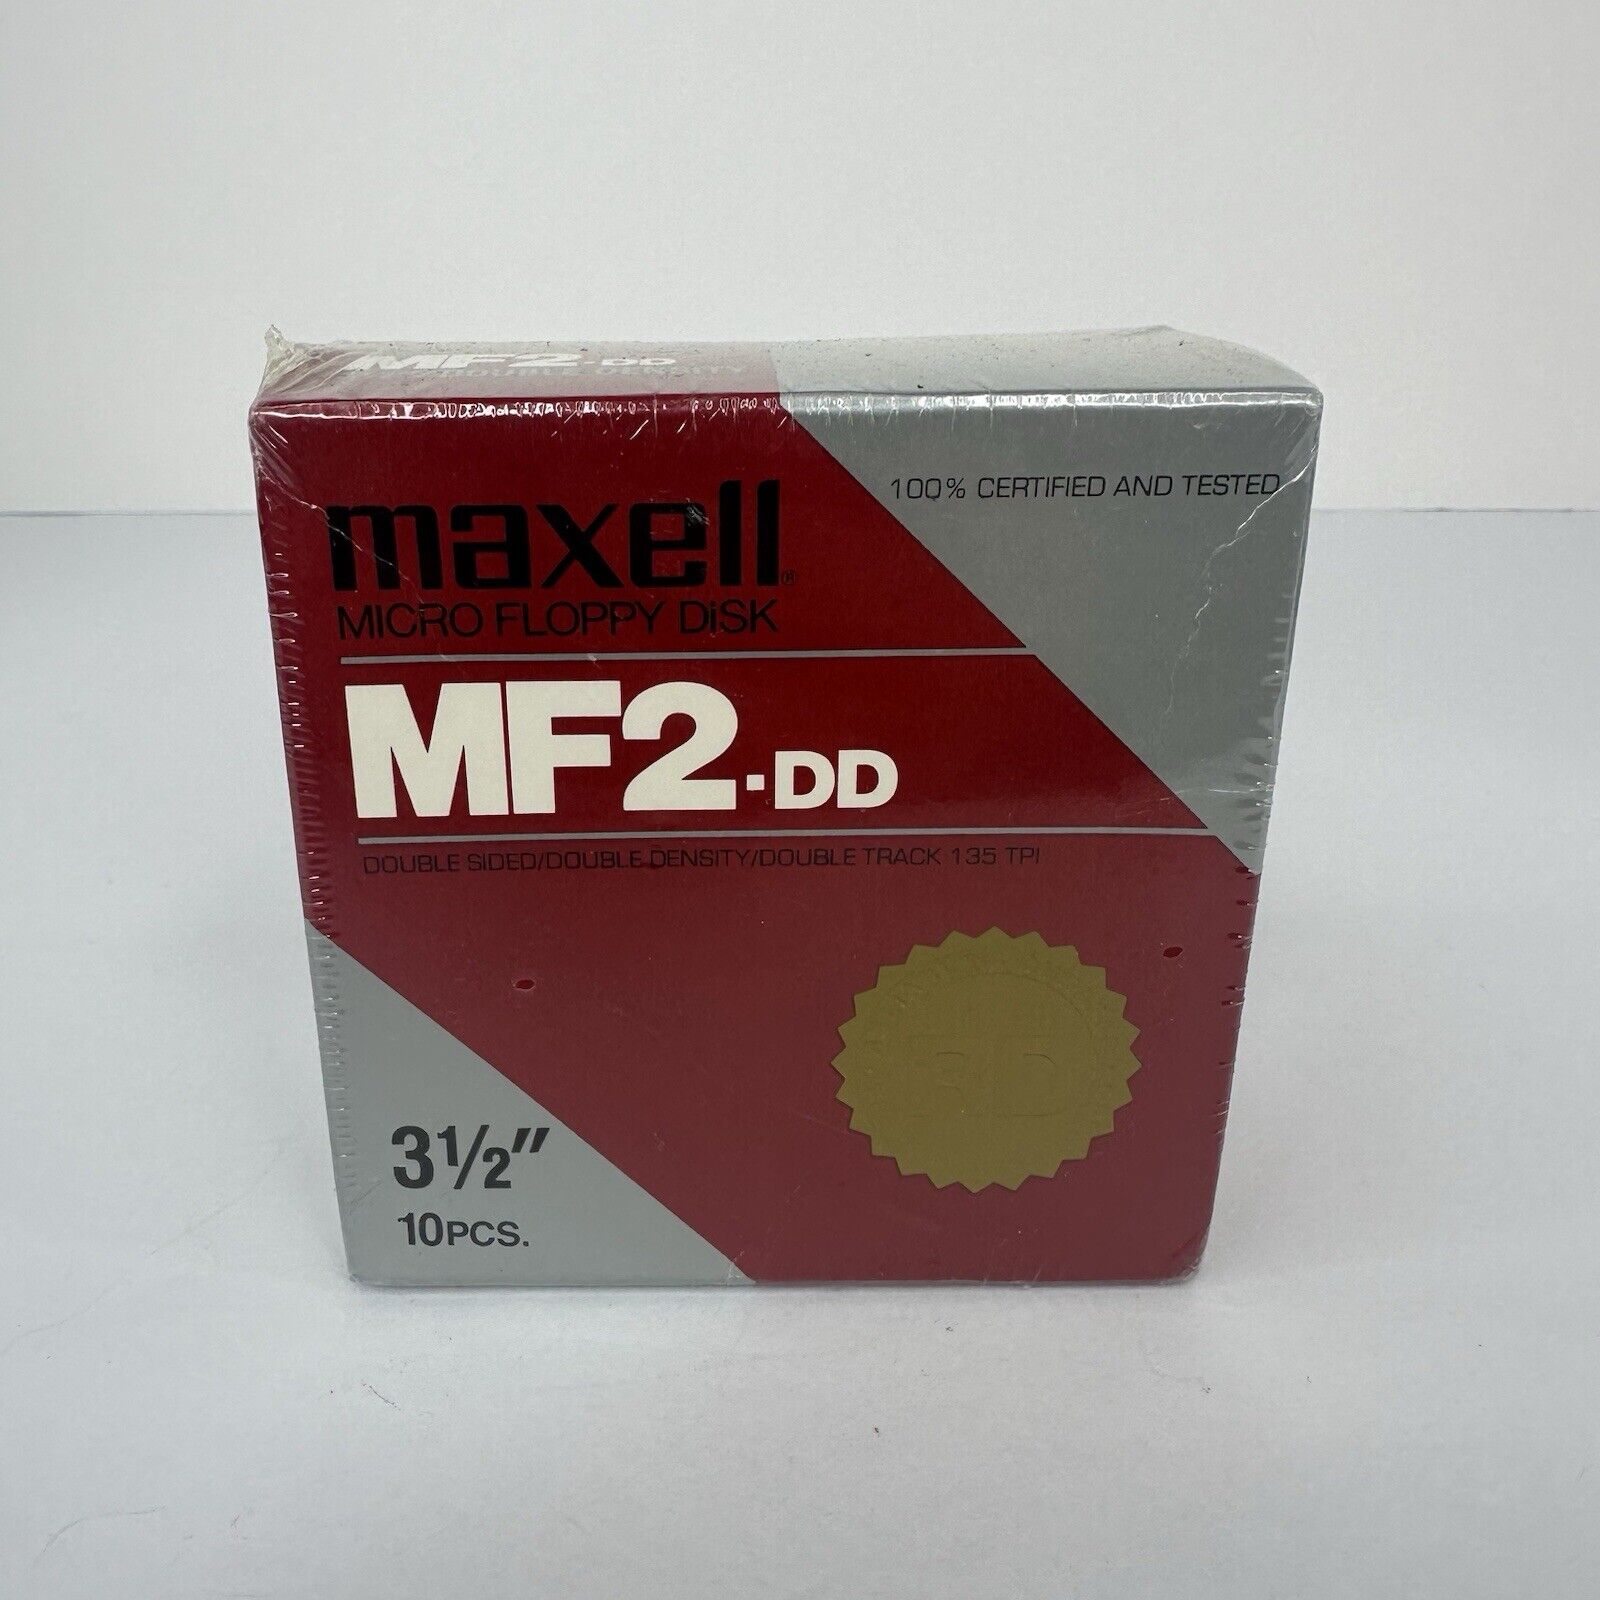 Maxell Micro 3.5 Inch Floppy Disks MF2-DD Double Sided Density Track 10 Pack New